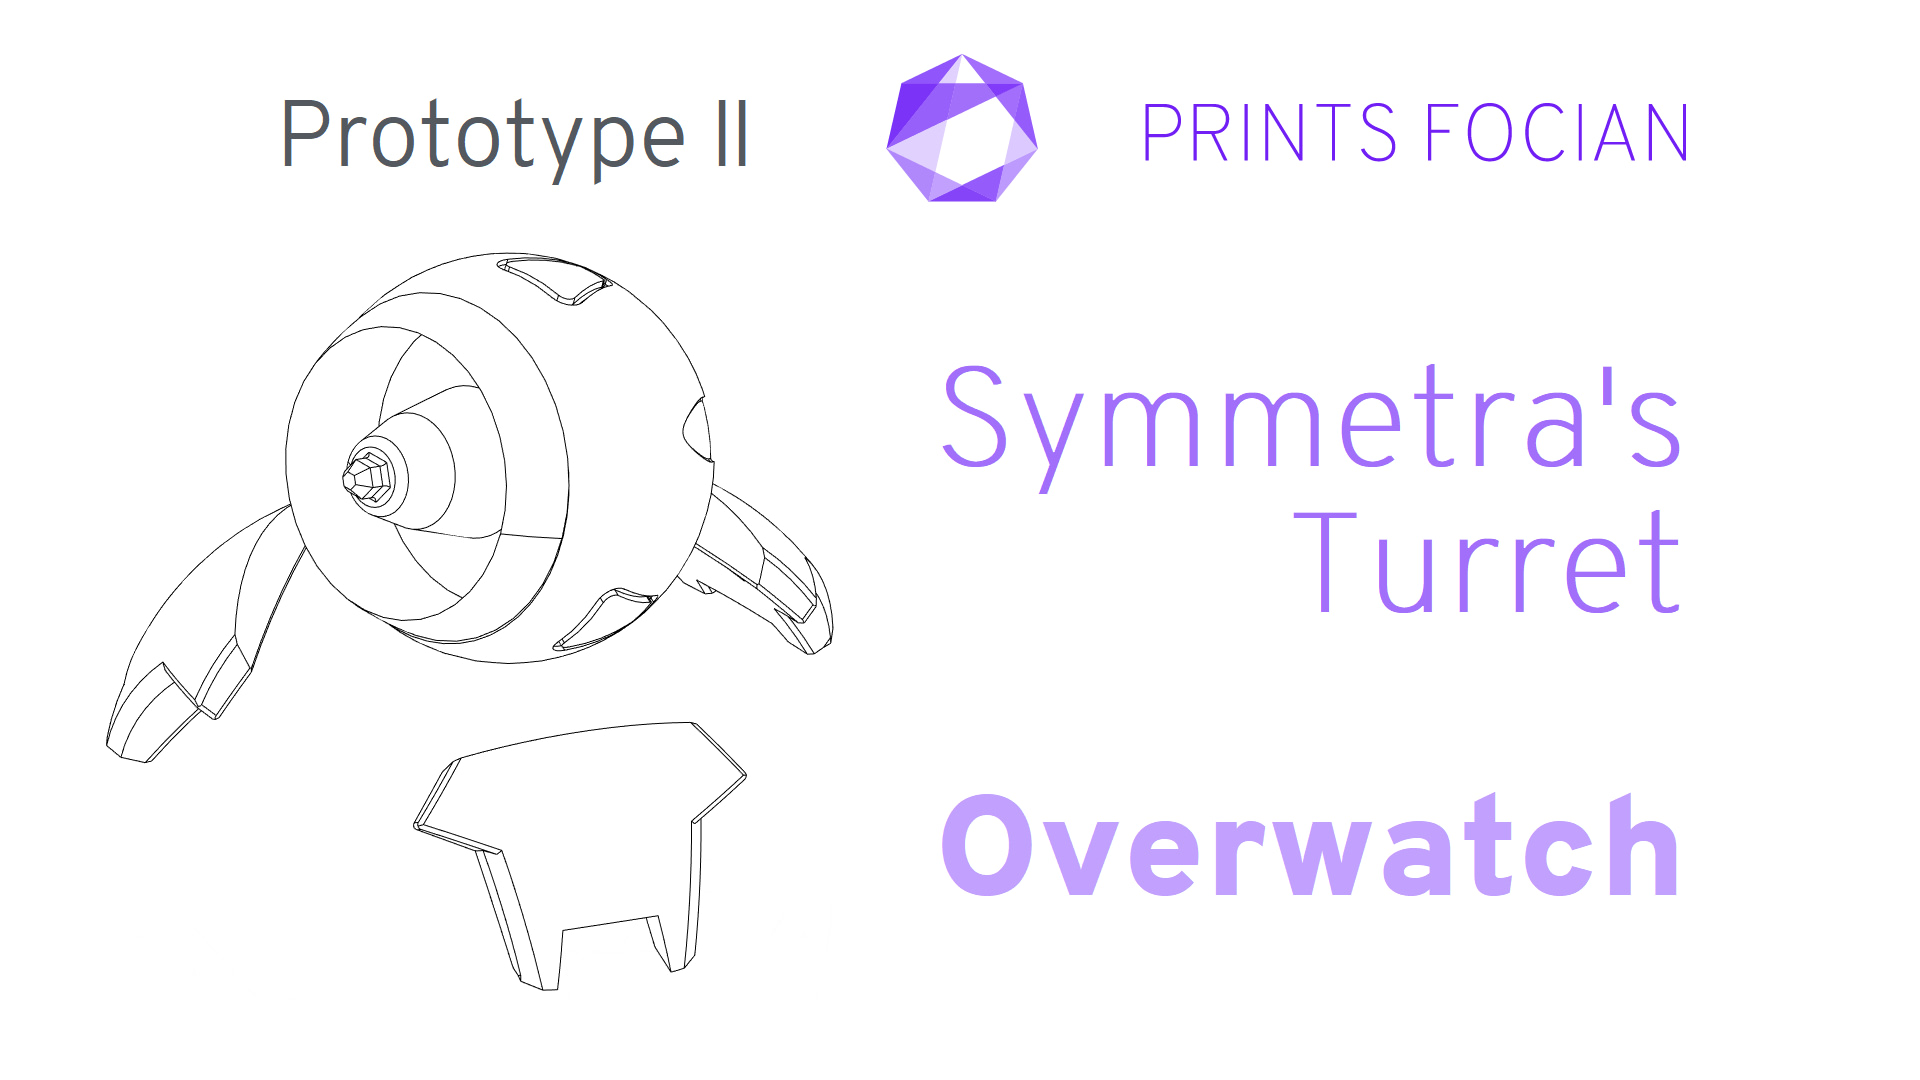 Wireframe image of Symmetra's Turret on a white background. Prints Focian Icon top and central. Text: Purple Prints Focian, Symmetra's Turret, Overwatch and dark grey Prototype II